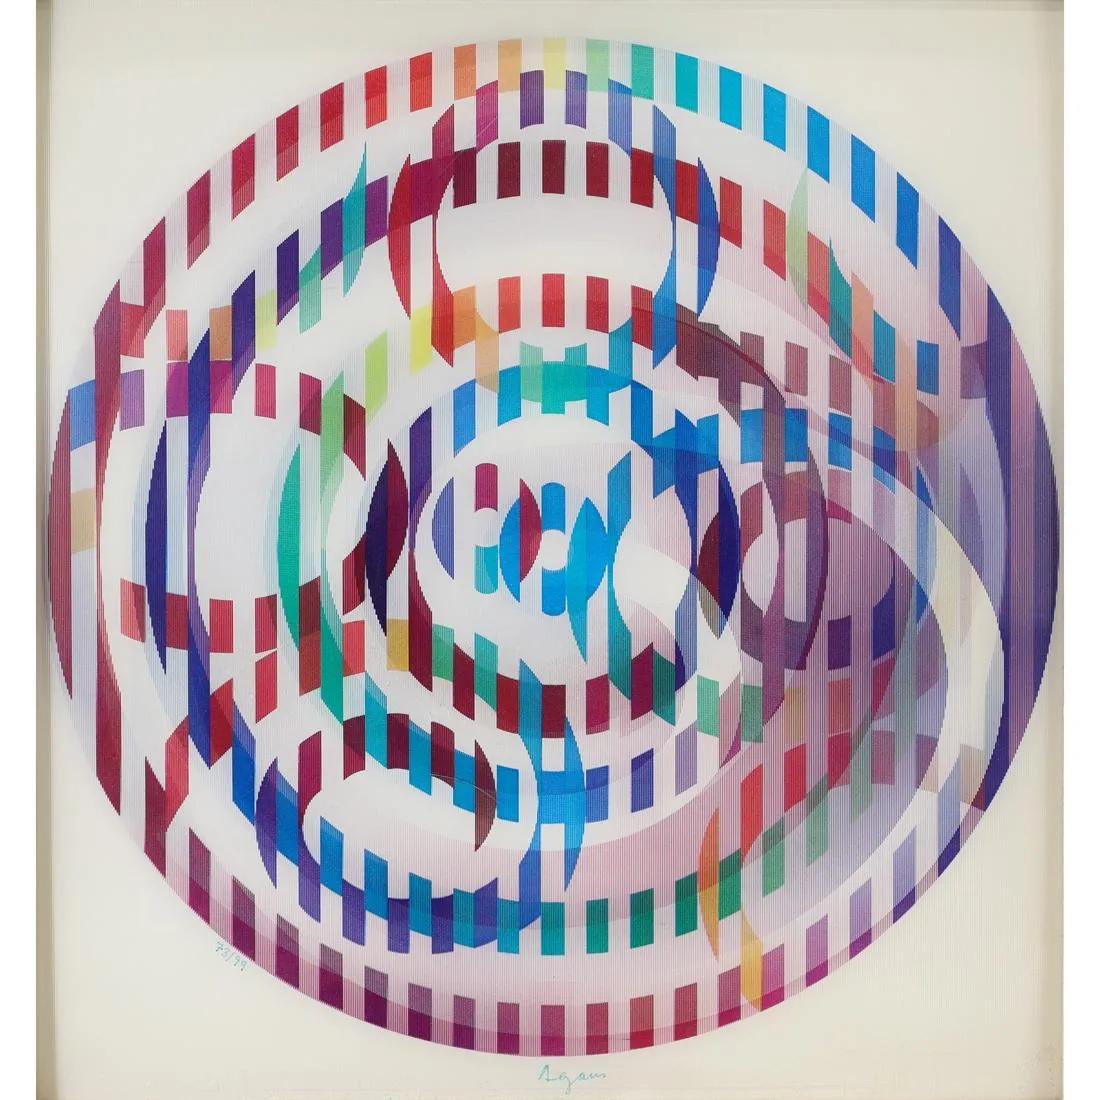 Yaacov Agam (Israeli, b. 1928), 
'Image of the World', titled by hand on the reverse
Agamograph (lenticular plastic with laminated color screenprint)
Signed in pen lower right, edition 73/99
Image (oval): 14